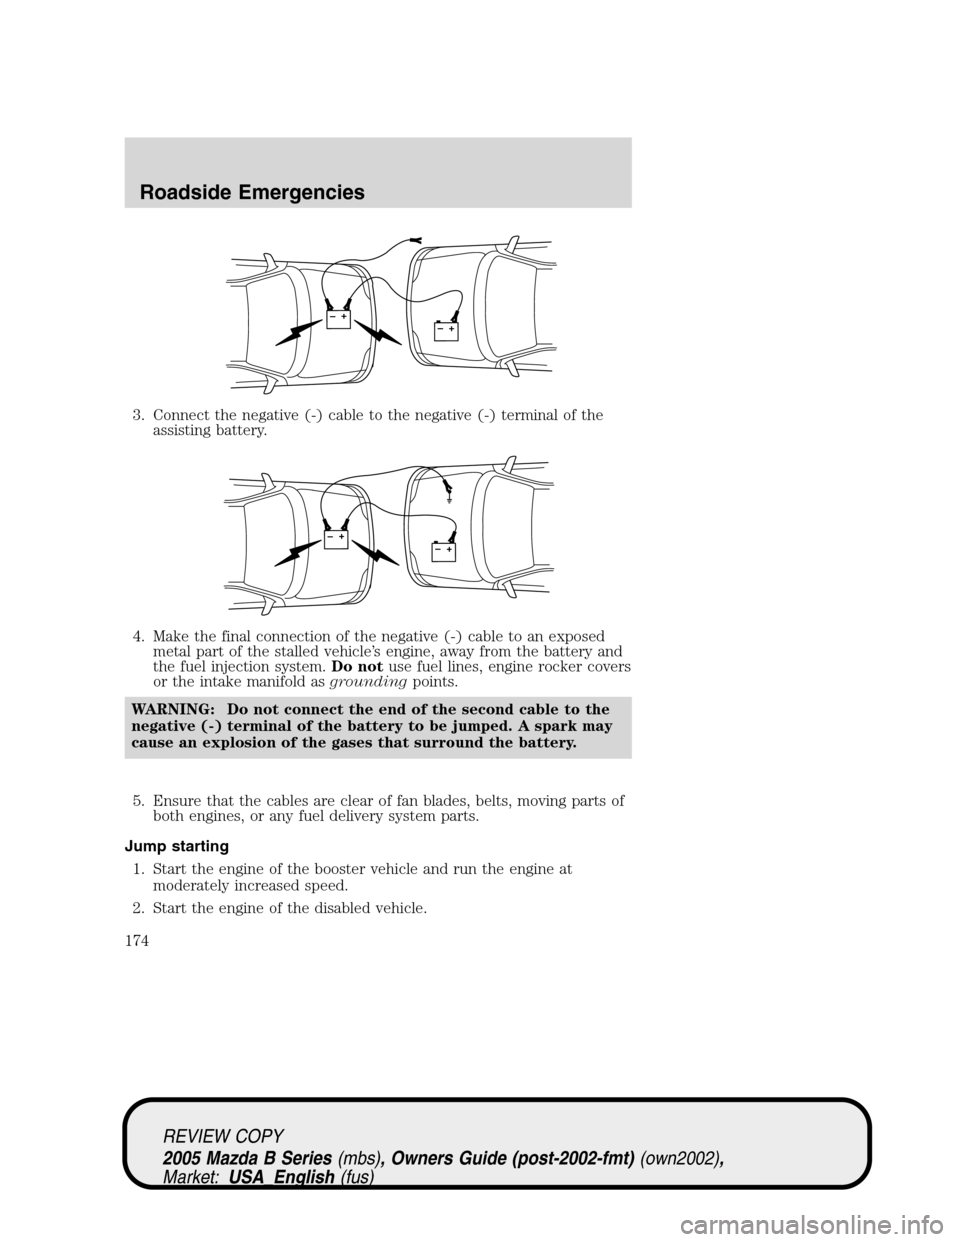 MAZDA MODEL B2300 TRUCK 2005  Owners Manual (in English) 3. Connect the negative (-) cable to the negative (-) terminal of the
assisting battery.
4. Make the final connection of the negative (-) cable to an exposed
metal part of the stalled vehicle’s engi